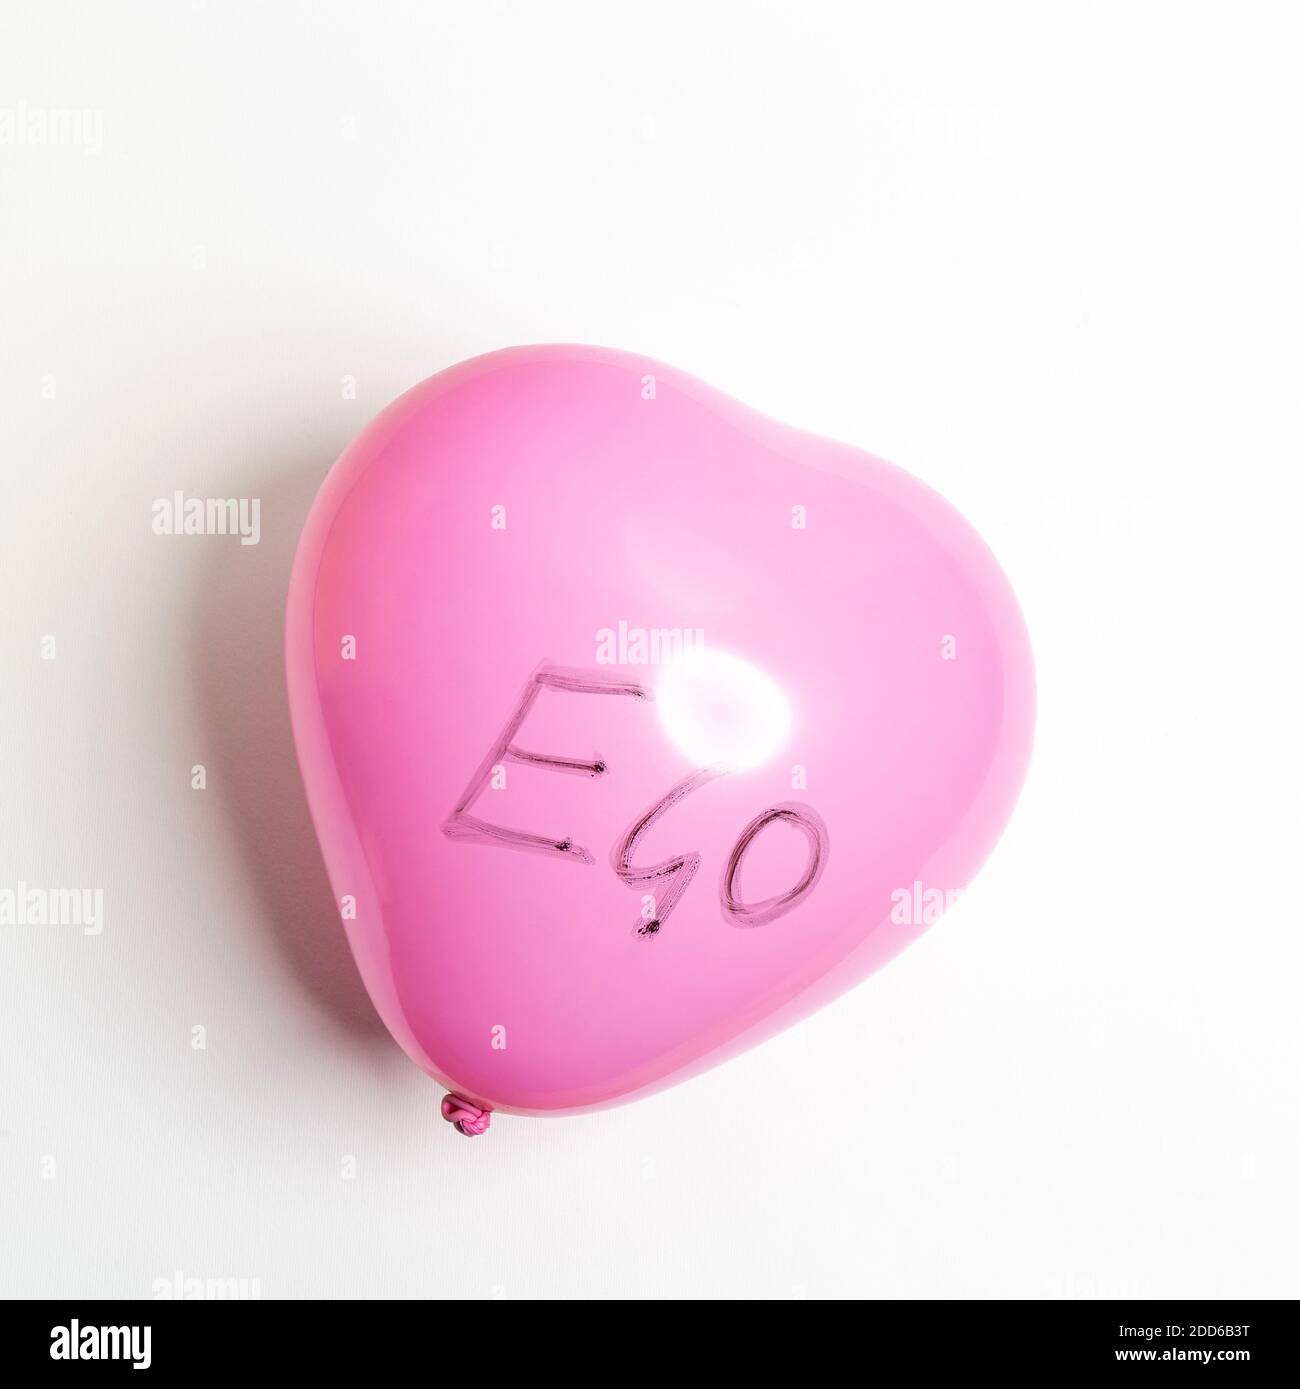 the ego represented with a pink balloon Stock Photo